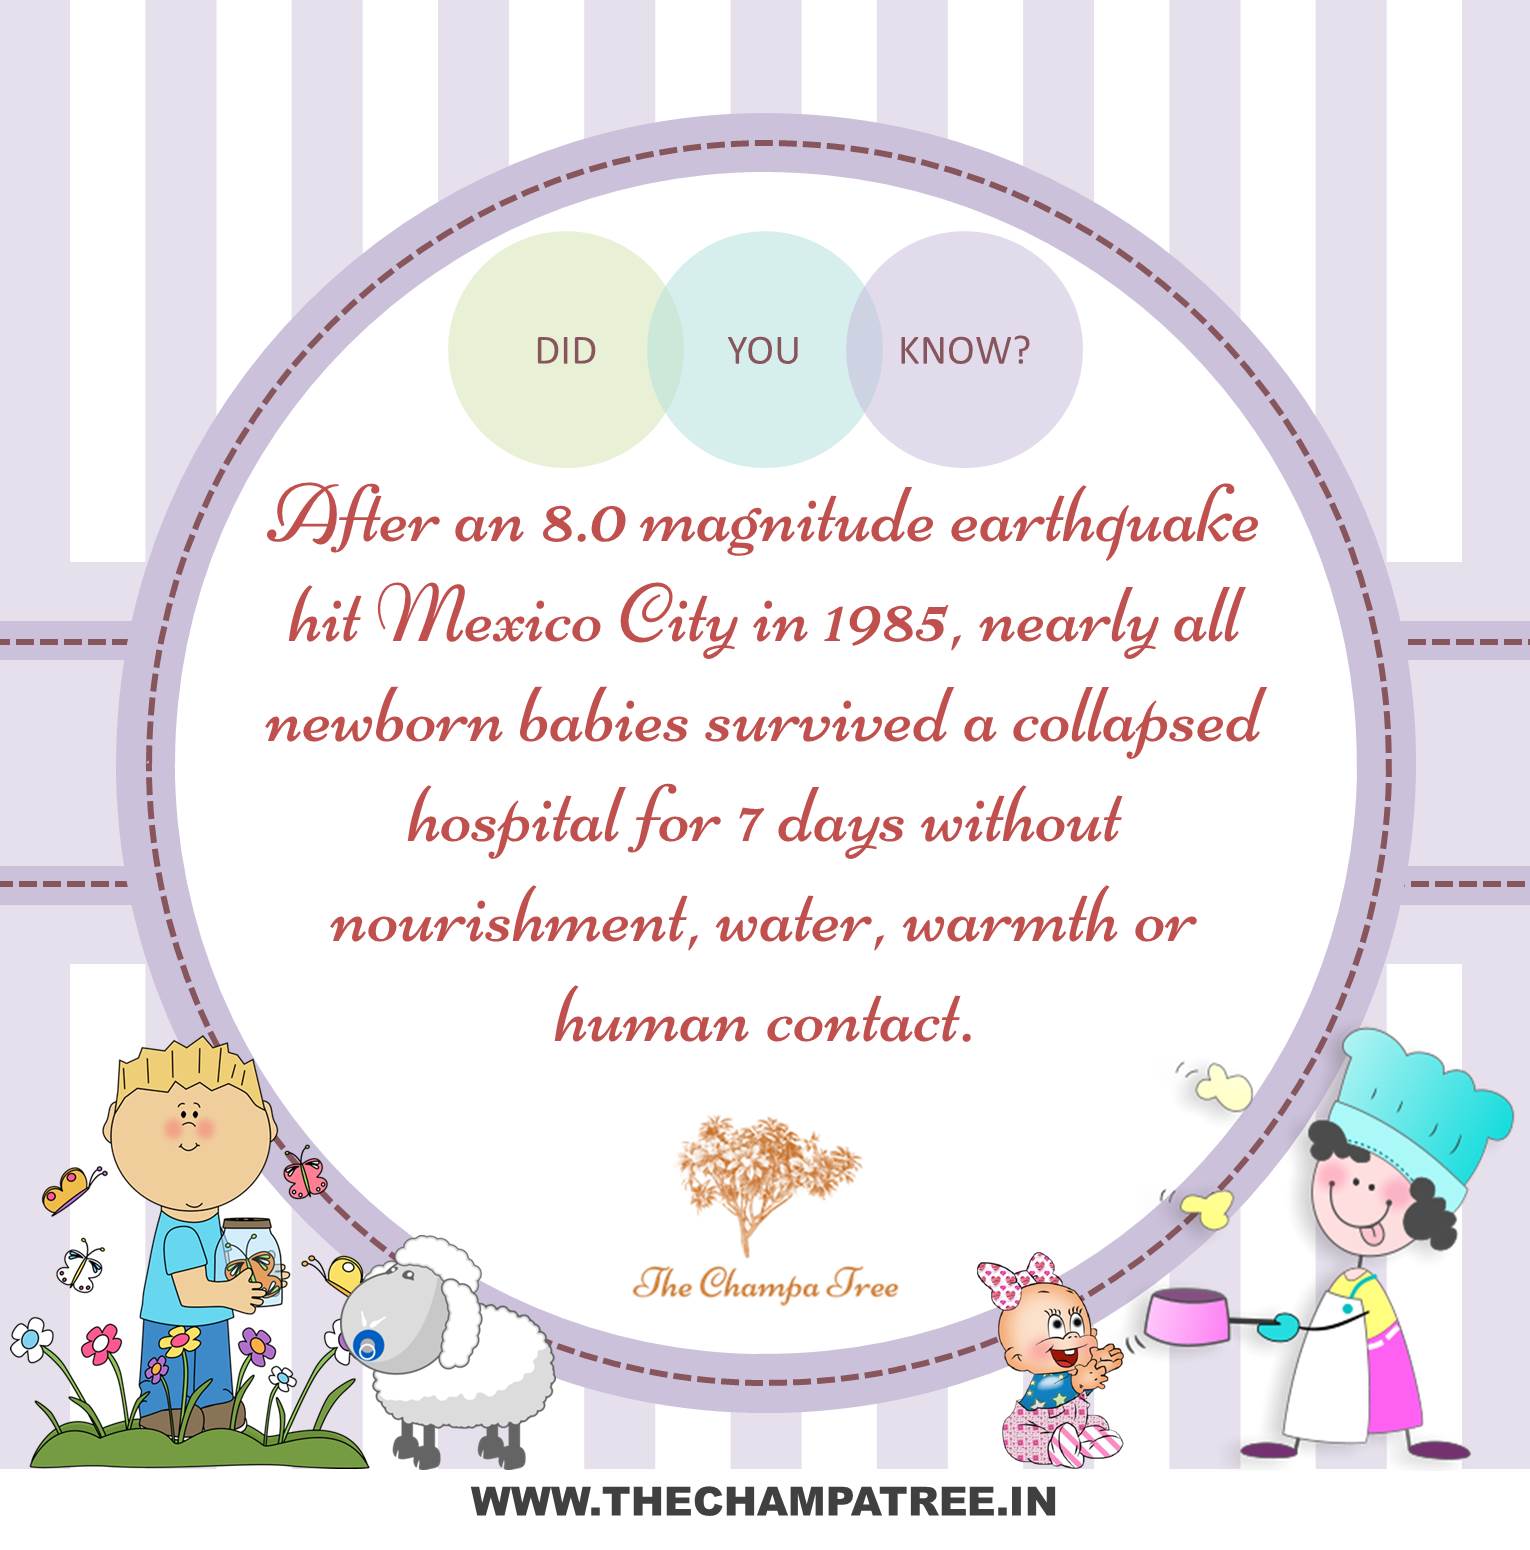 Did You Know Facts - High magnitude earthquake